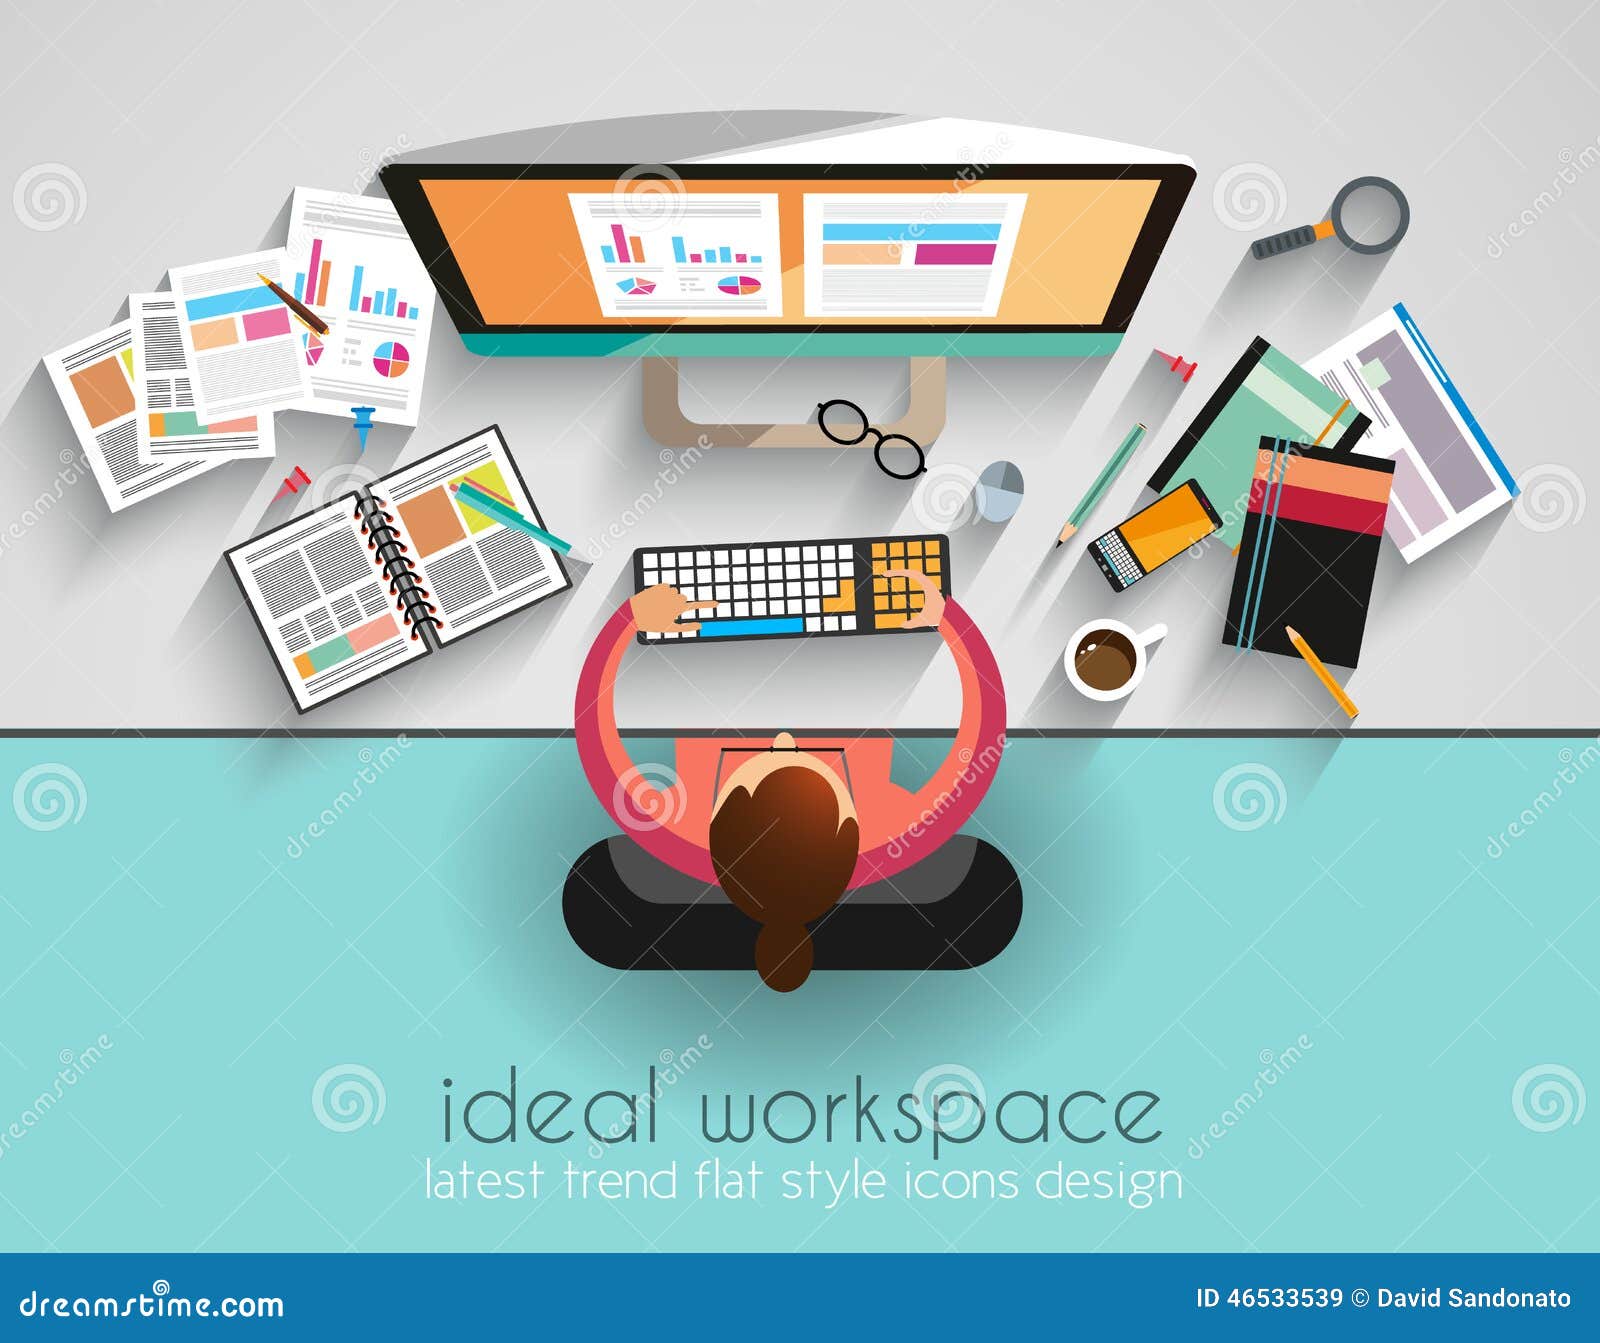 ideal workspace for teamwork and brainsotrming with flat style.